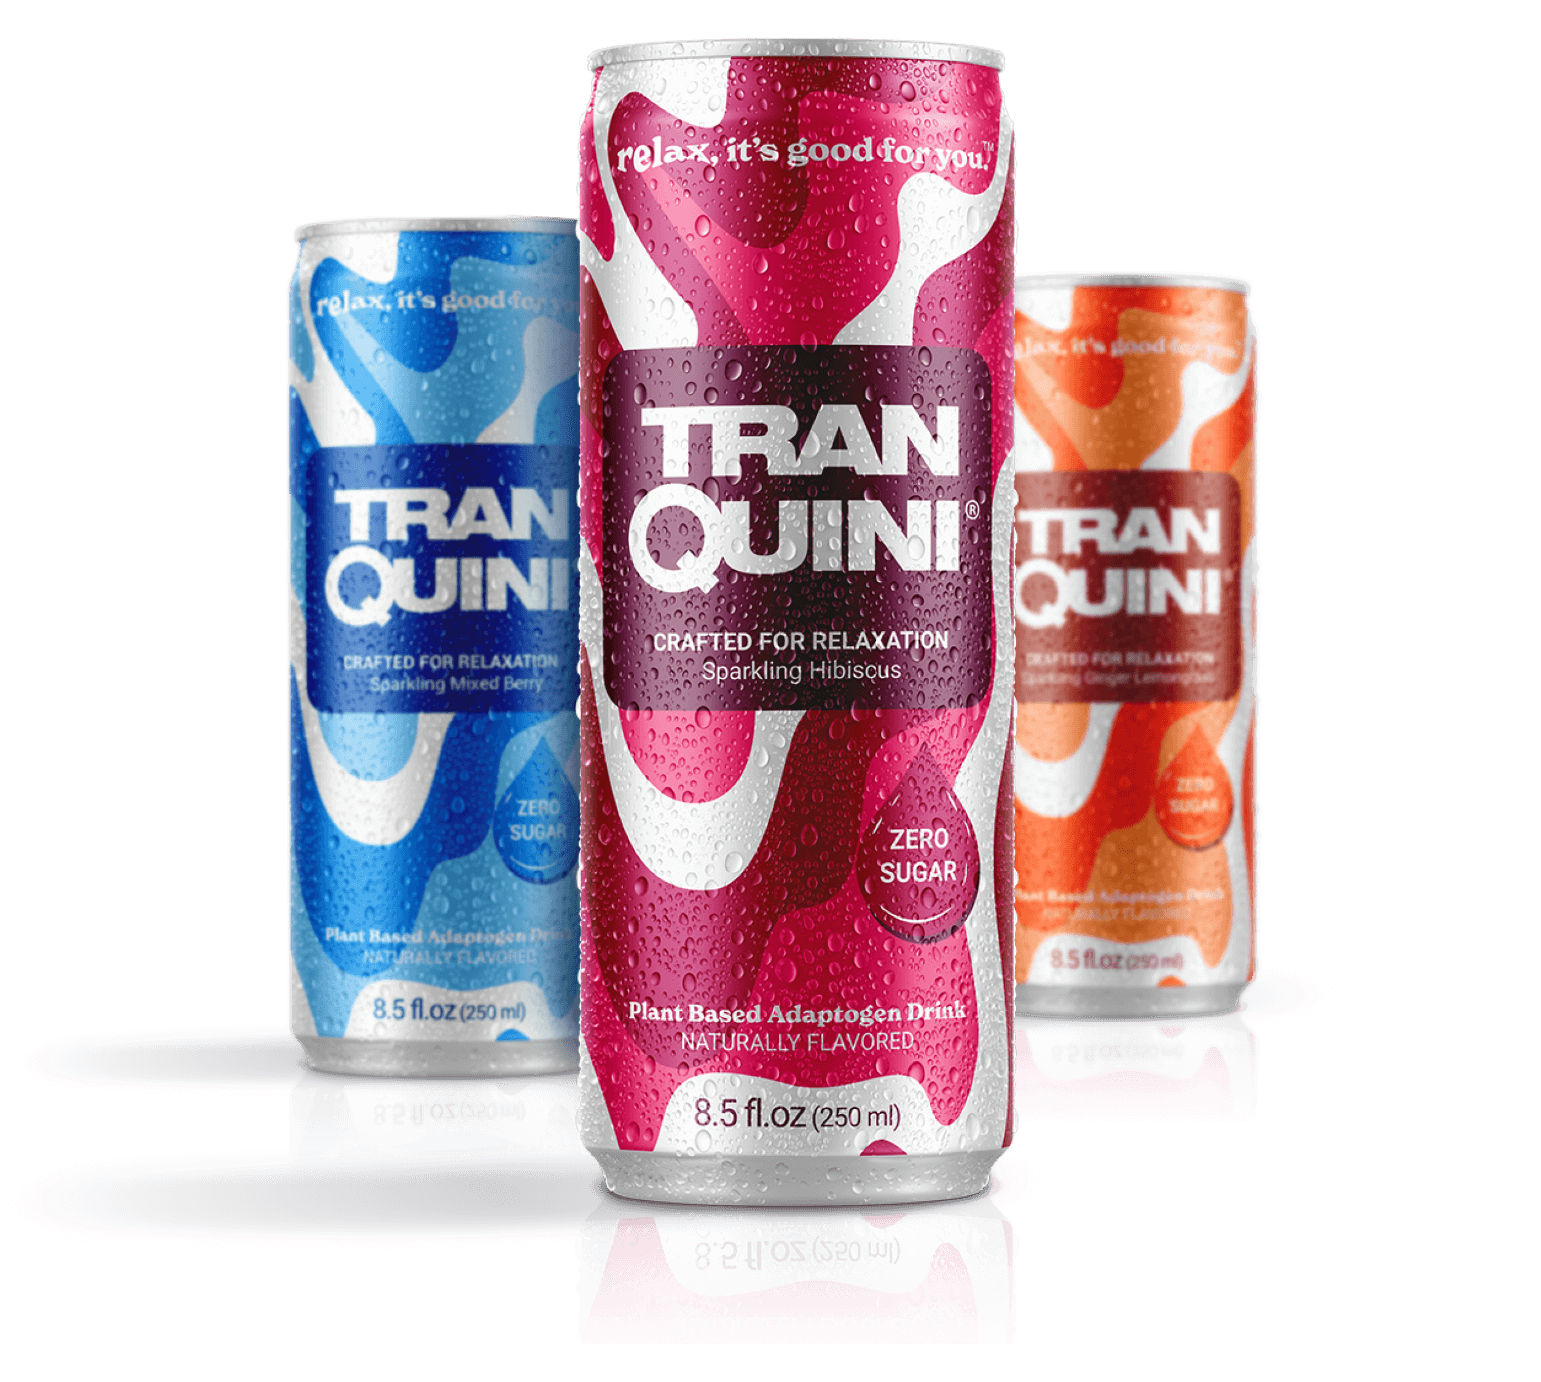 Image of three Subscription beverage cans standing upright. The flavors include sparkling mixed berry (blue can), sparkling hibiscus (red can), and sparkling ginger lemongrass (orange can). The cans, covered in water droplets, have the slogan "relax, it's good for you." Consider a subscription for continuous calm.